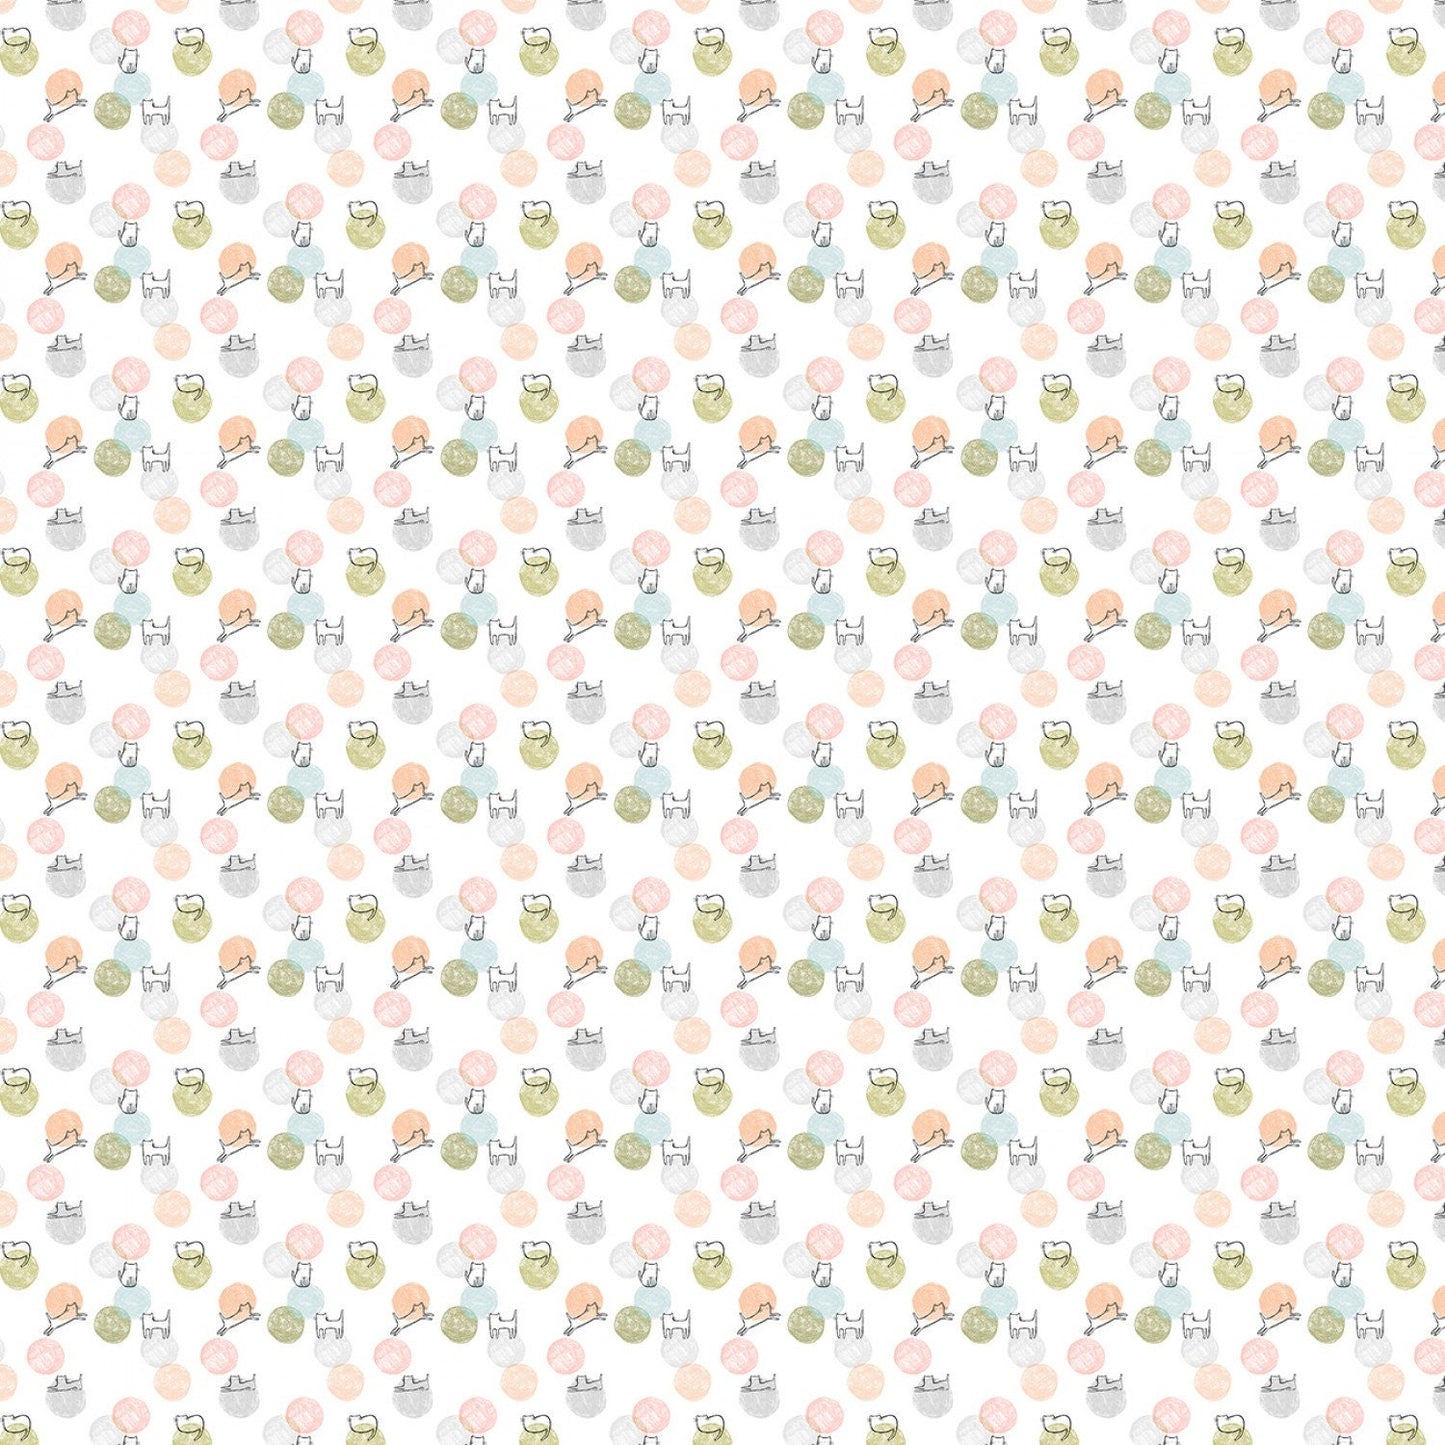 Purrfection Yarn Cathlectic, White Cathletic Cotton Quilting Fabric